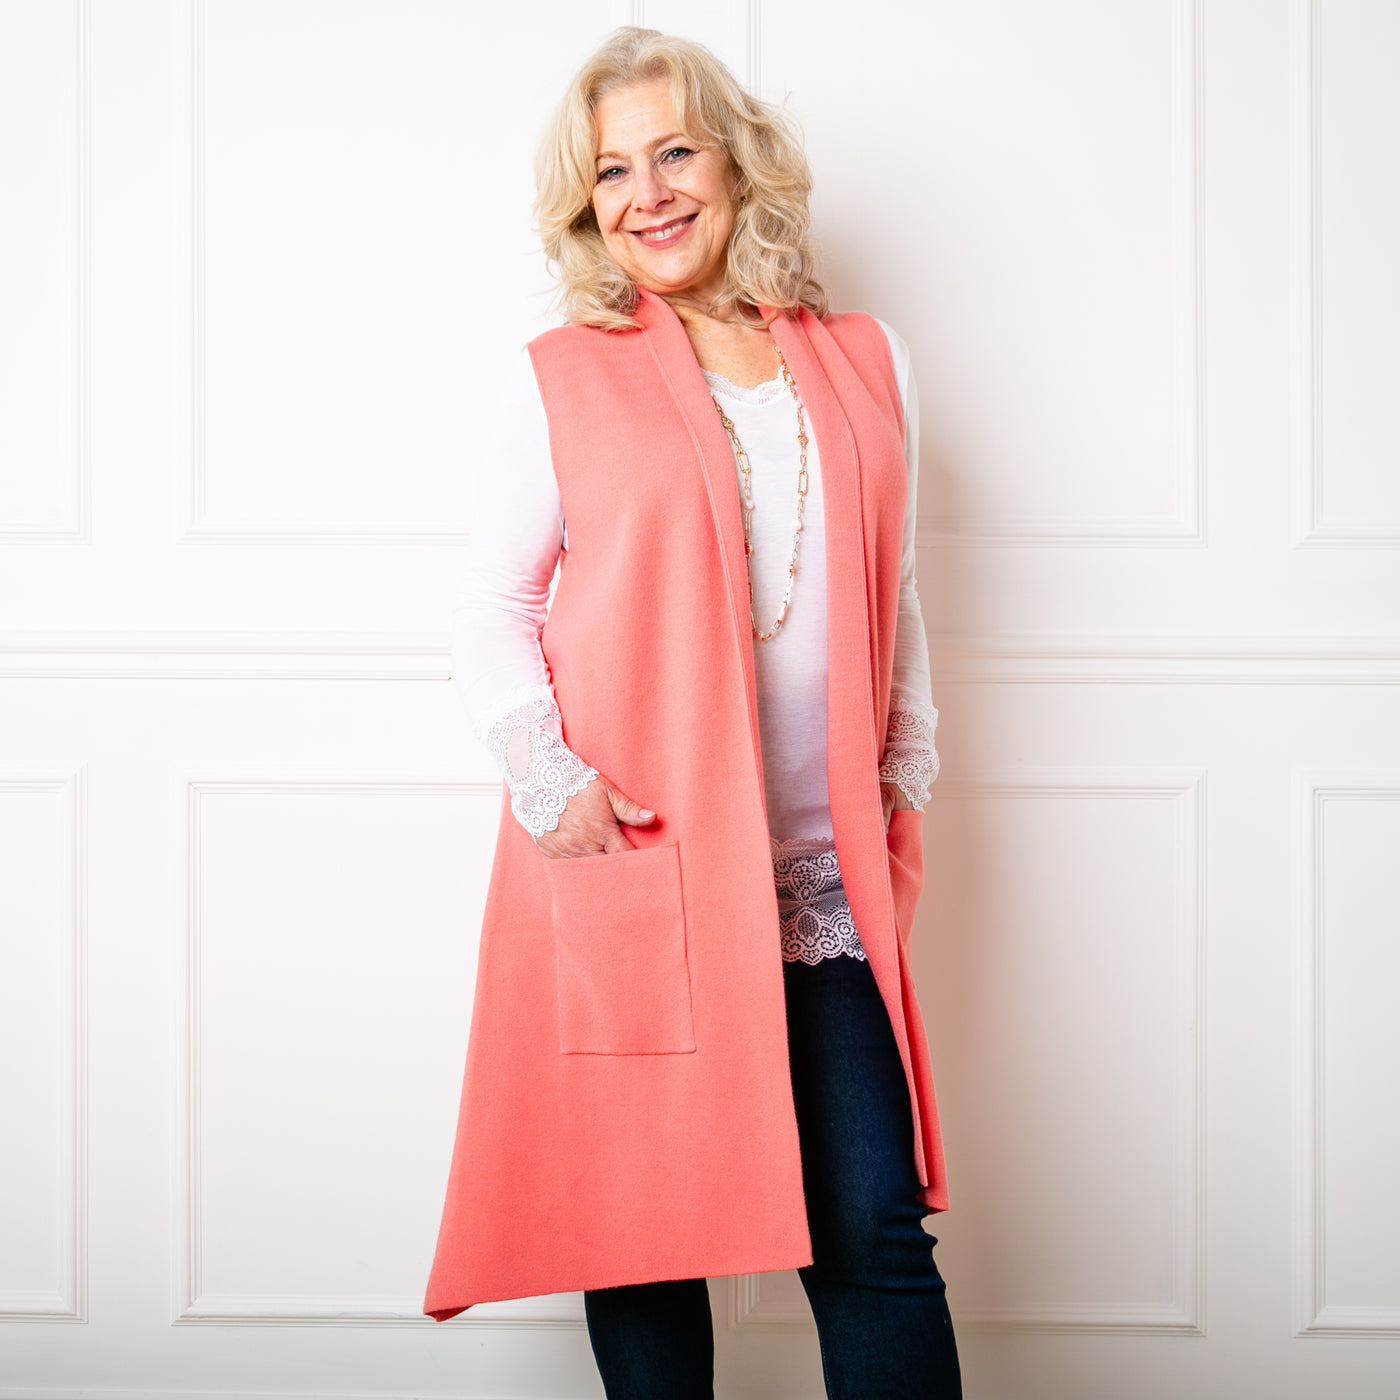 The coral pink Sleeveless Cardigan worn with a lace long sleeve top and trousers.